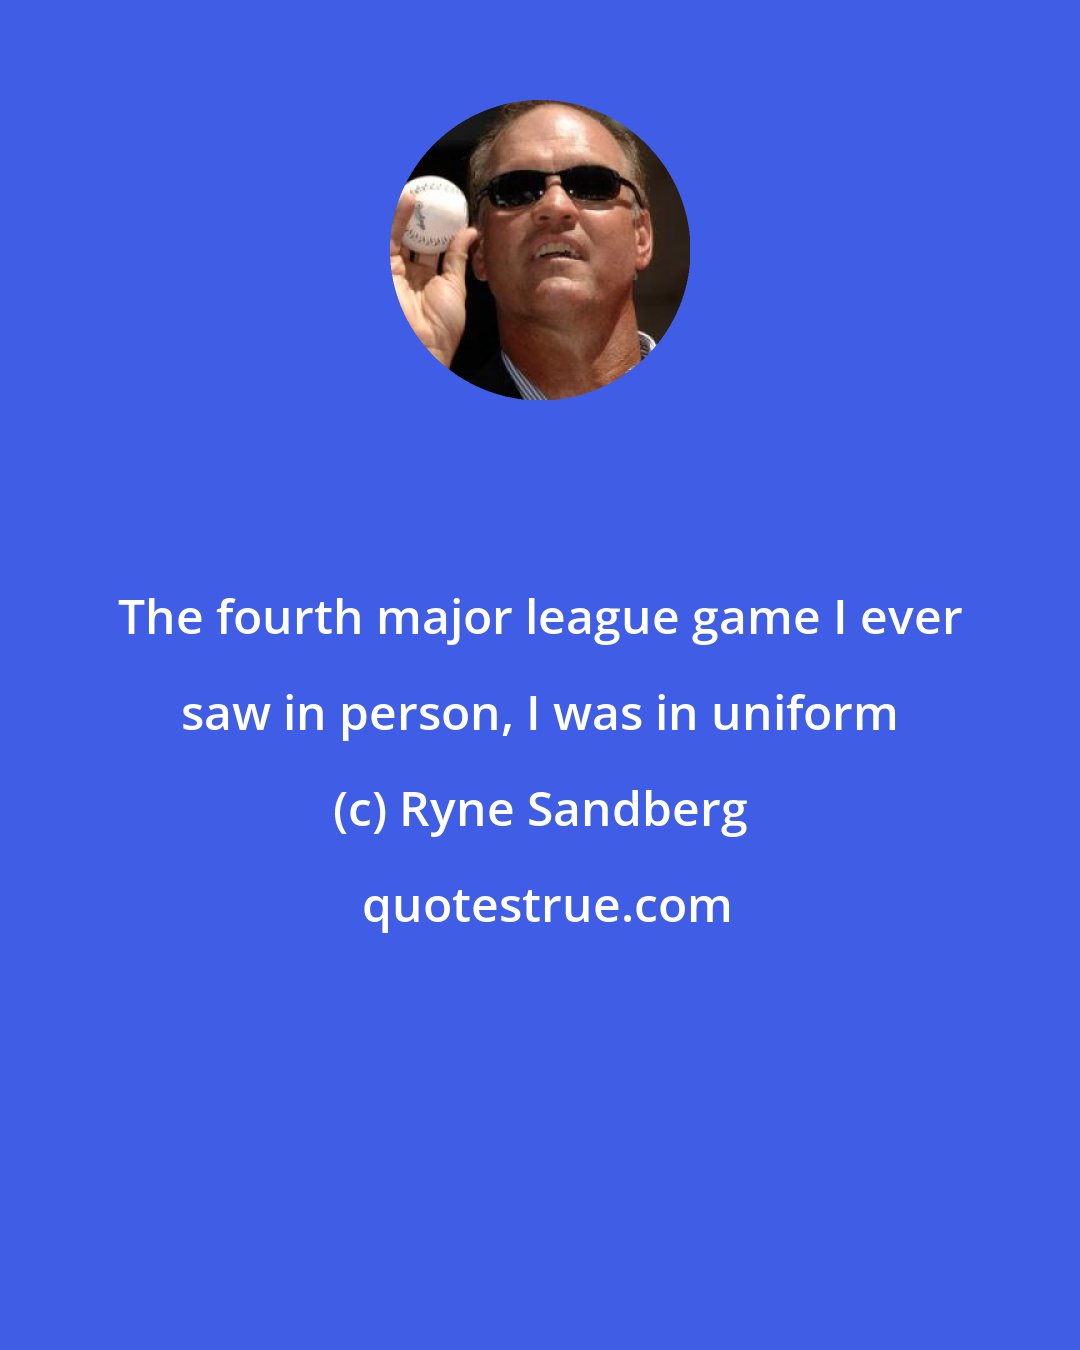 Ryne Sandberg: The fourth major league game I ever saw in person, I was in uniform